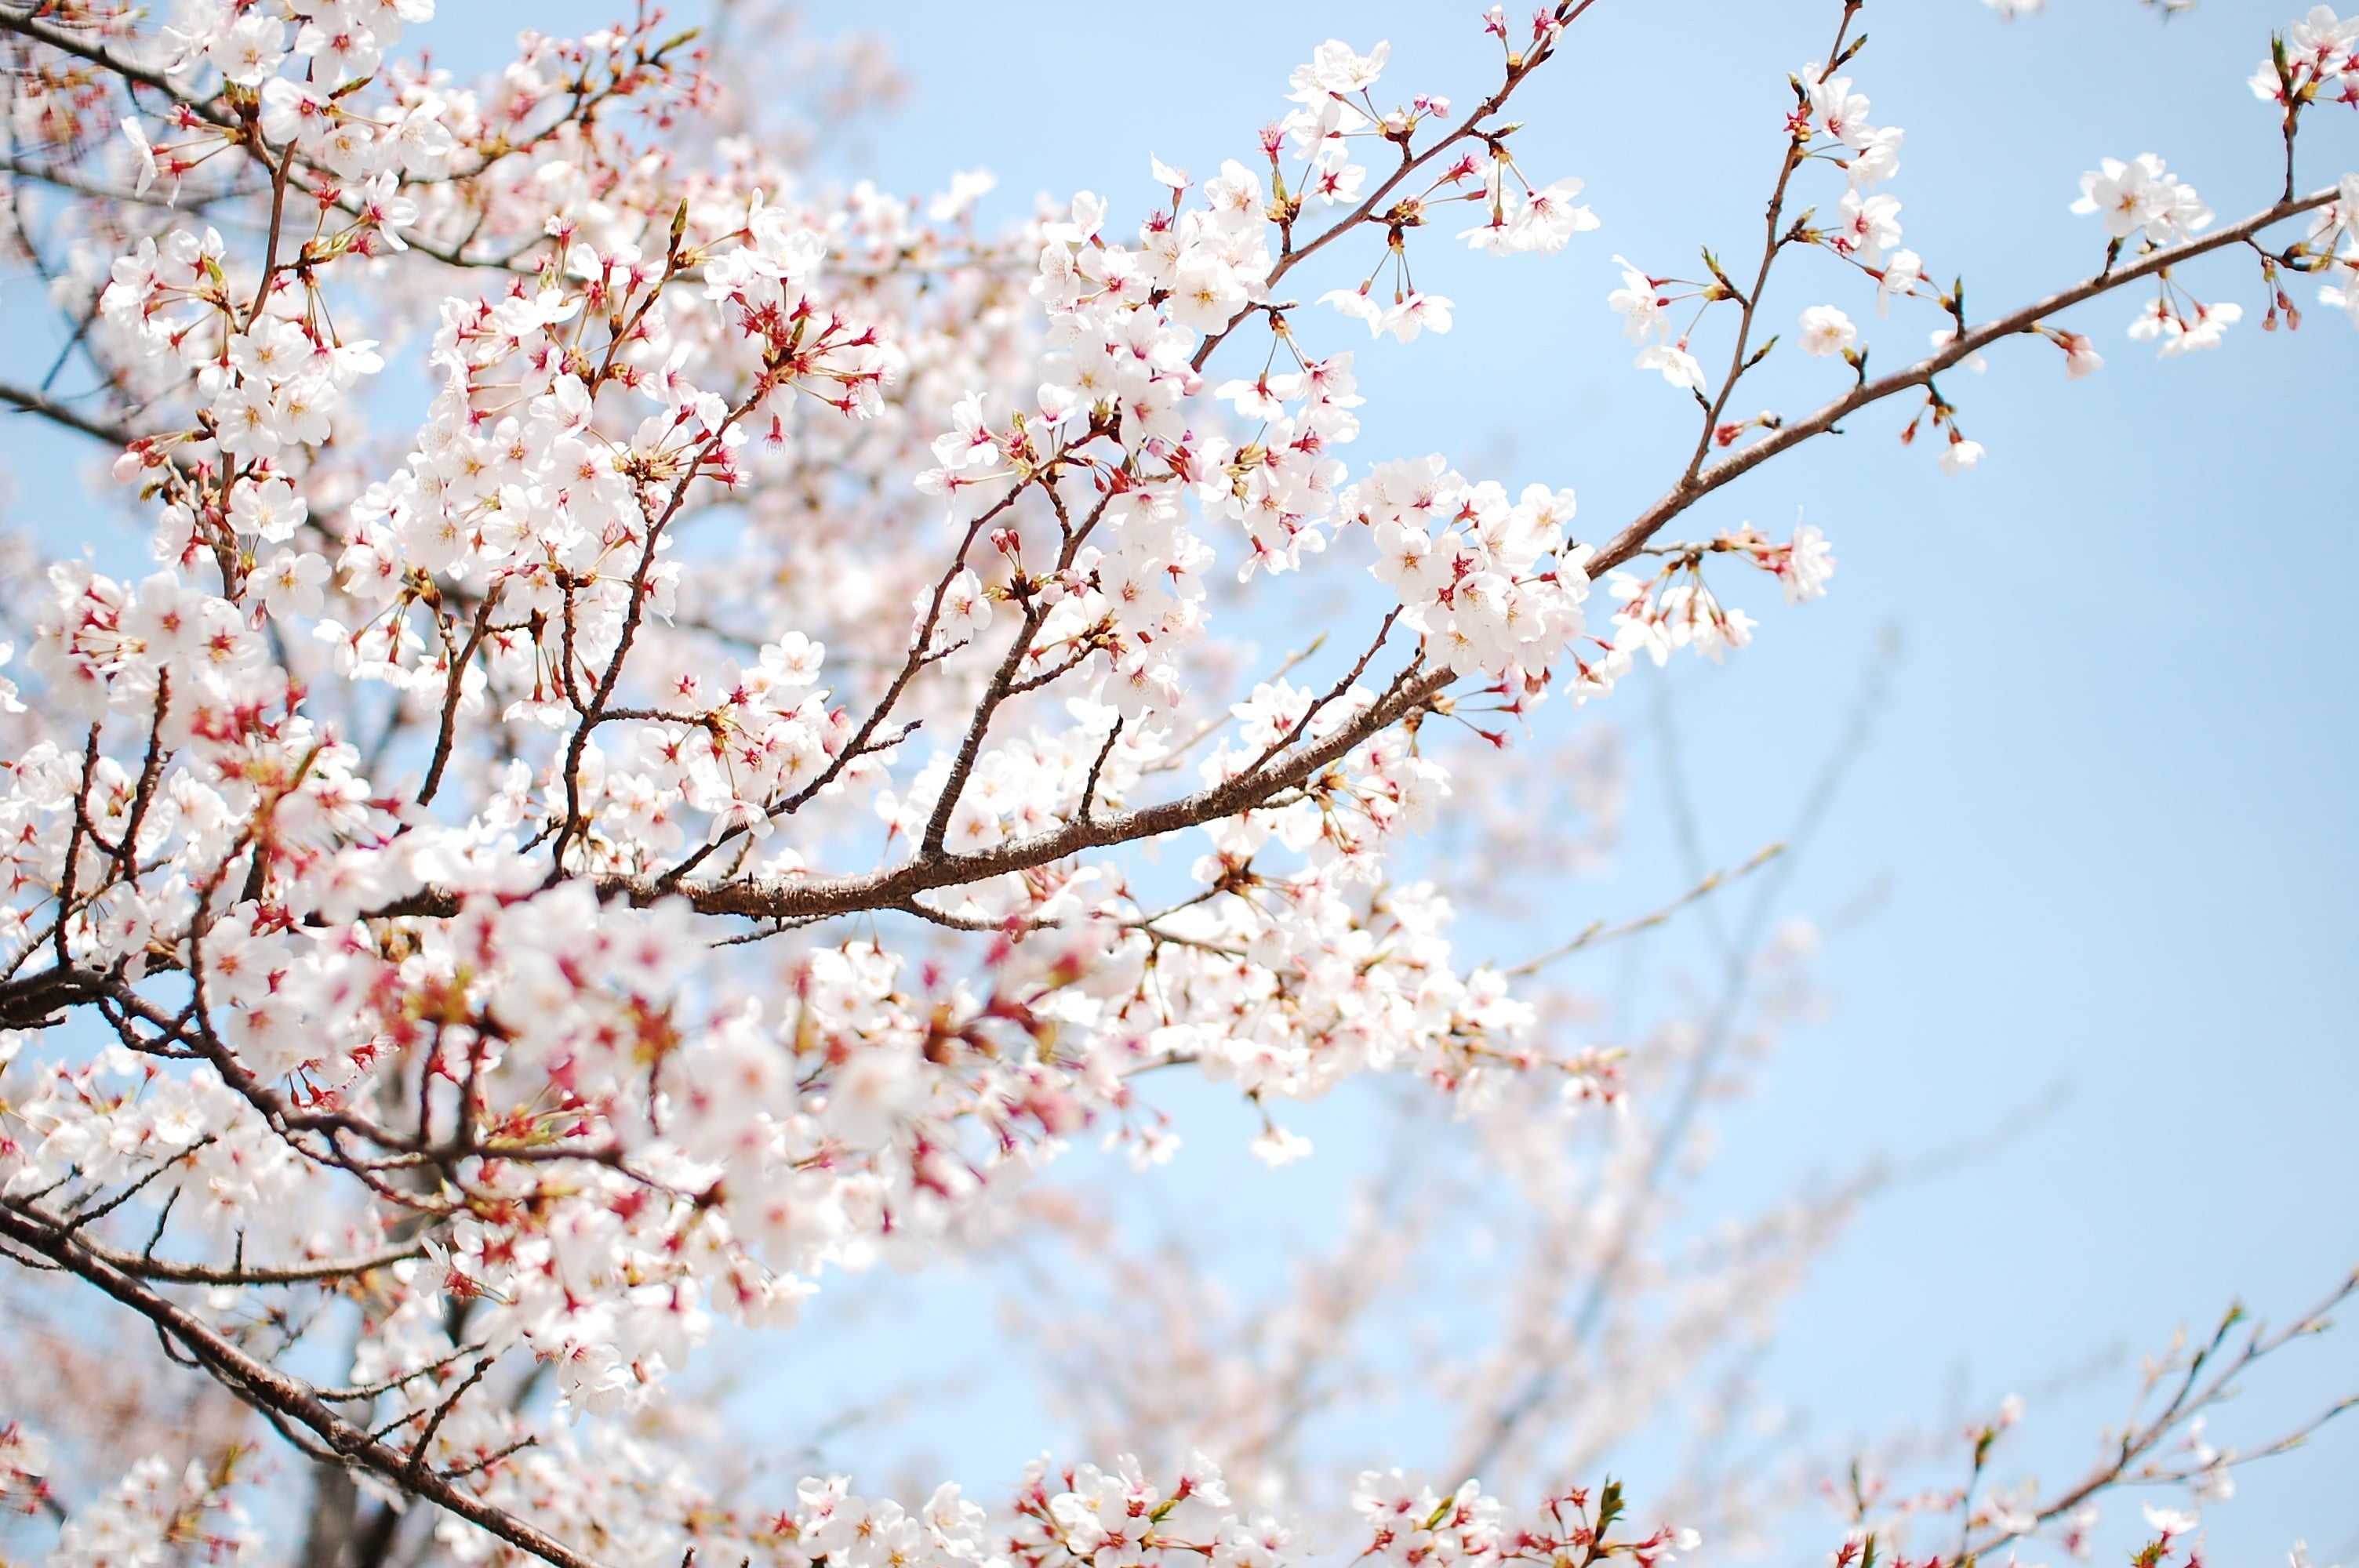 white cherry blossoms tree, flowers, trees, blossoms, nature